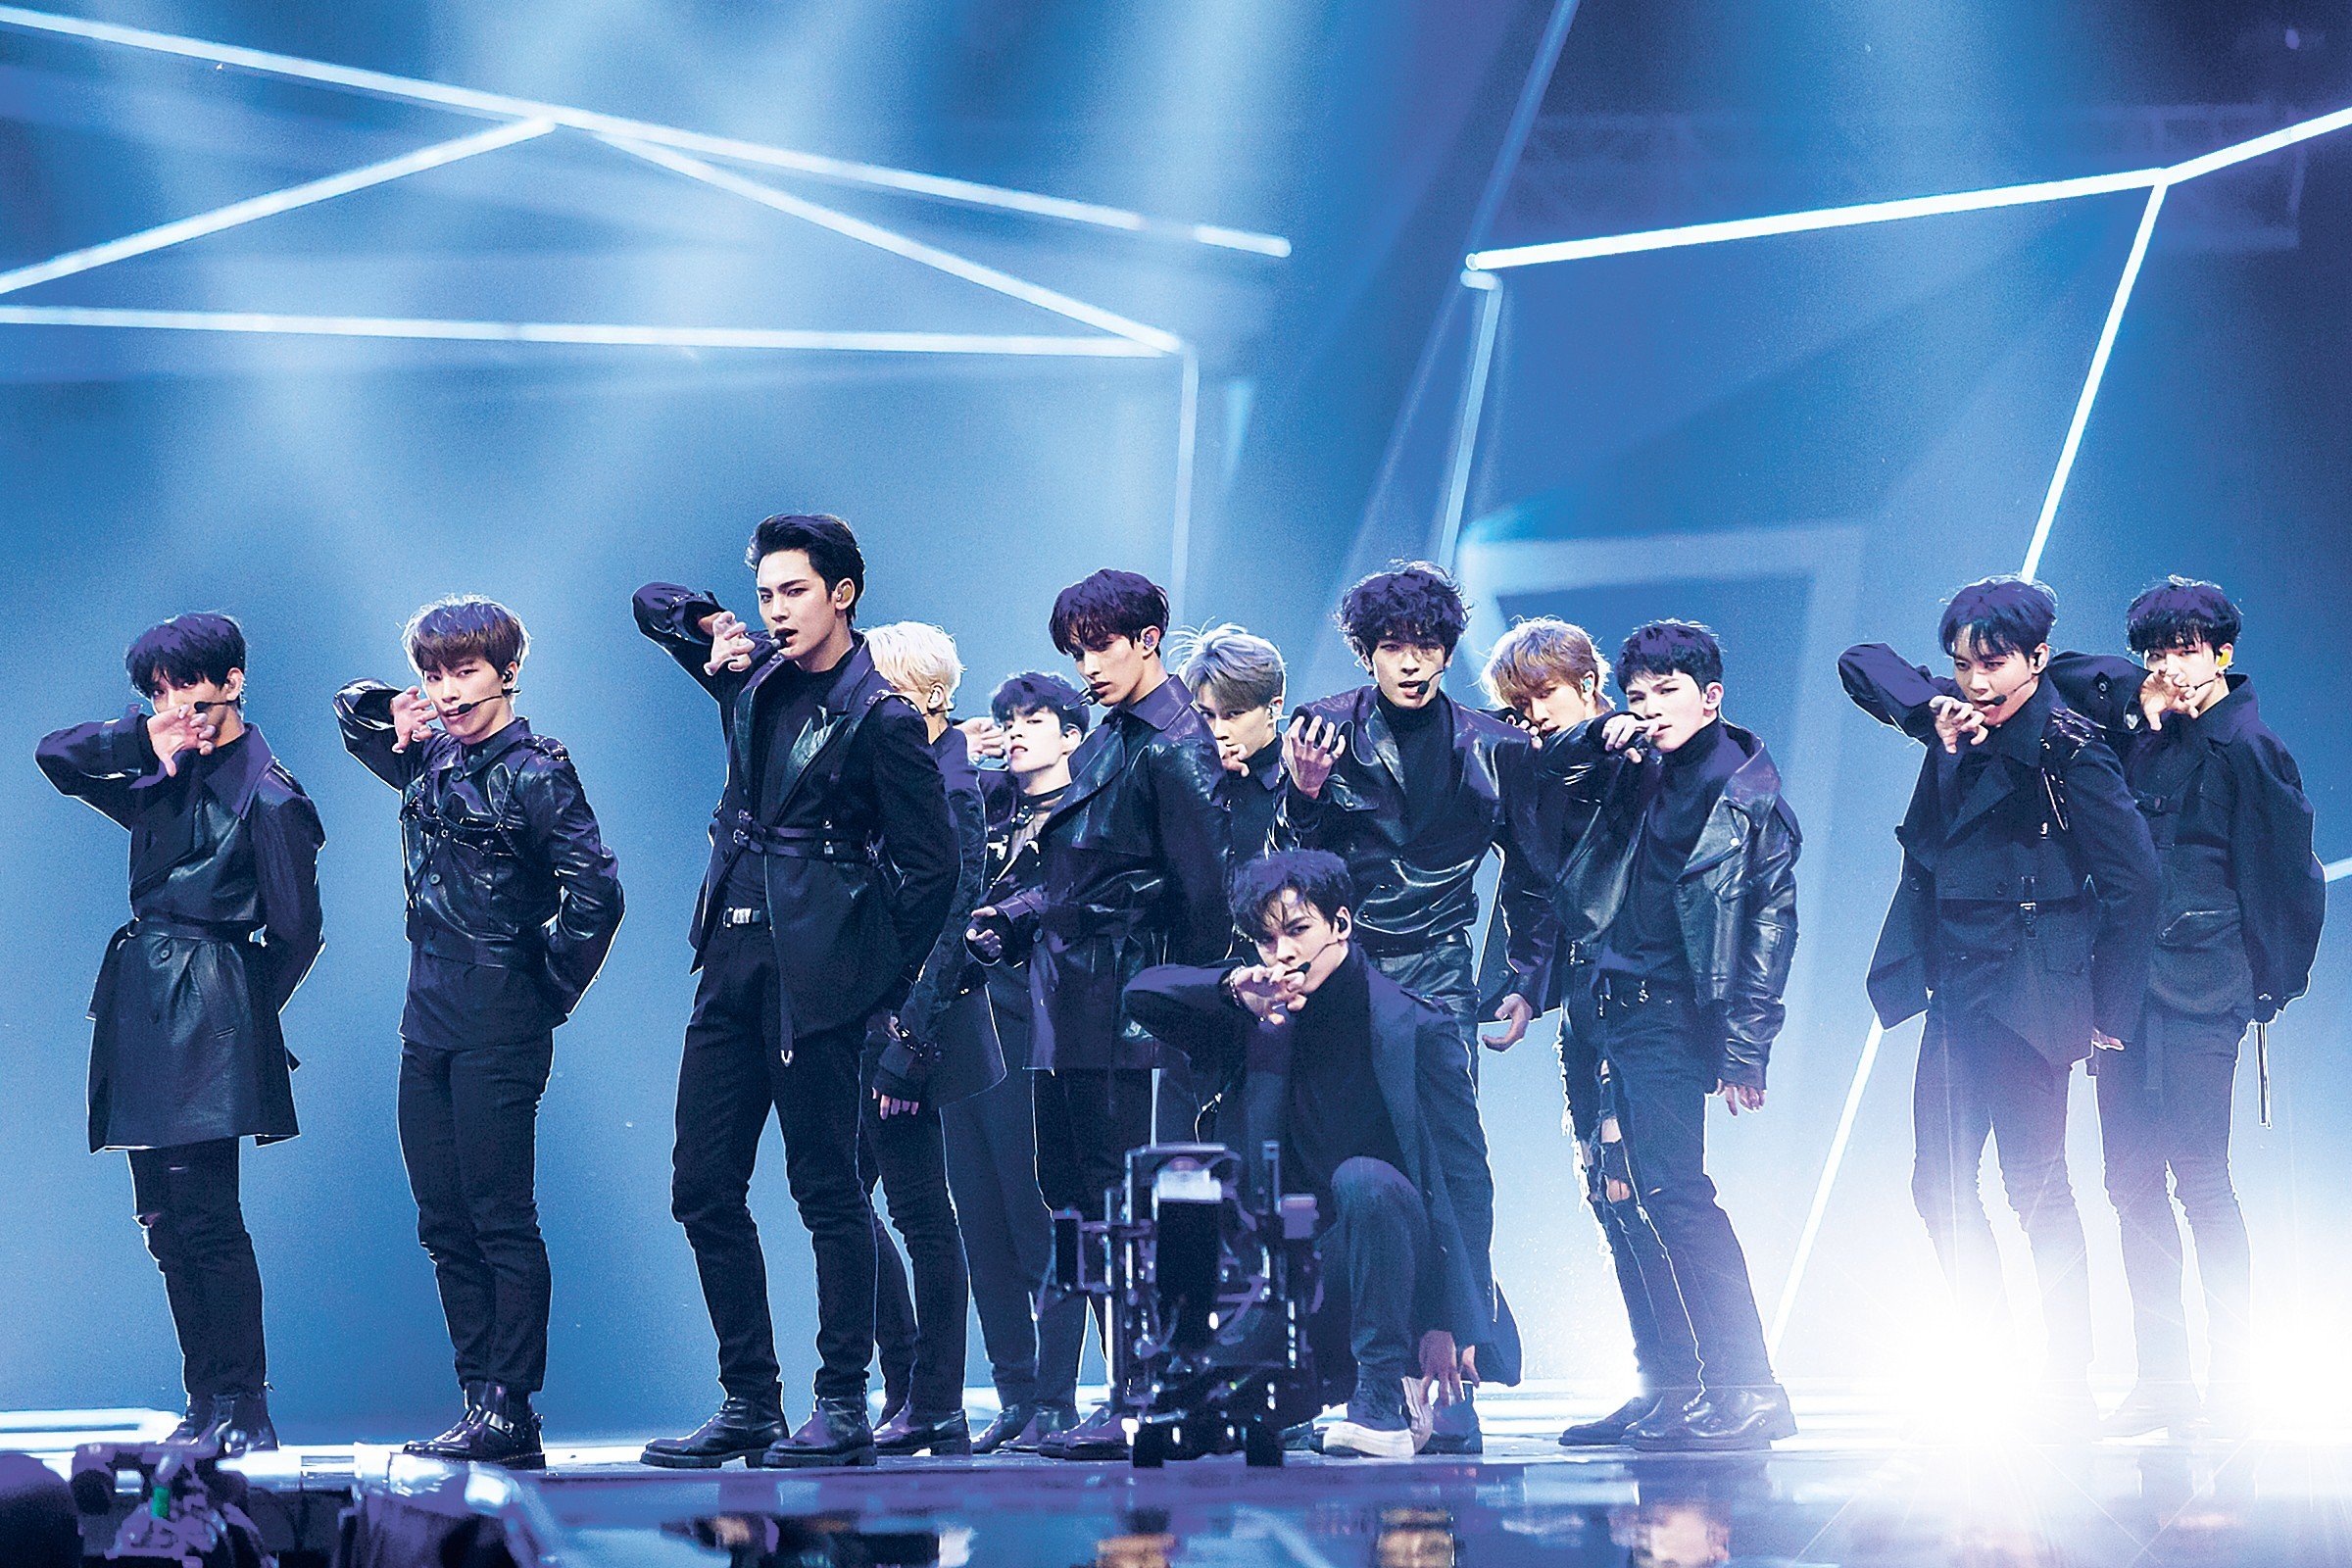 K-pop group Seventeen perform at the 2018 Mama show in Hong Kong. The annual K-pop awards show will skip Hong Kong because of the continuing anti-government protests, a music industry source says. Photo: Mama